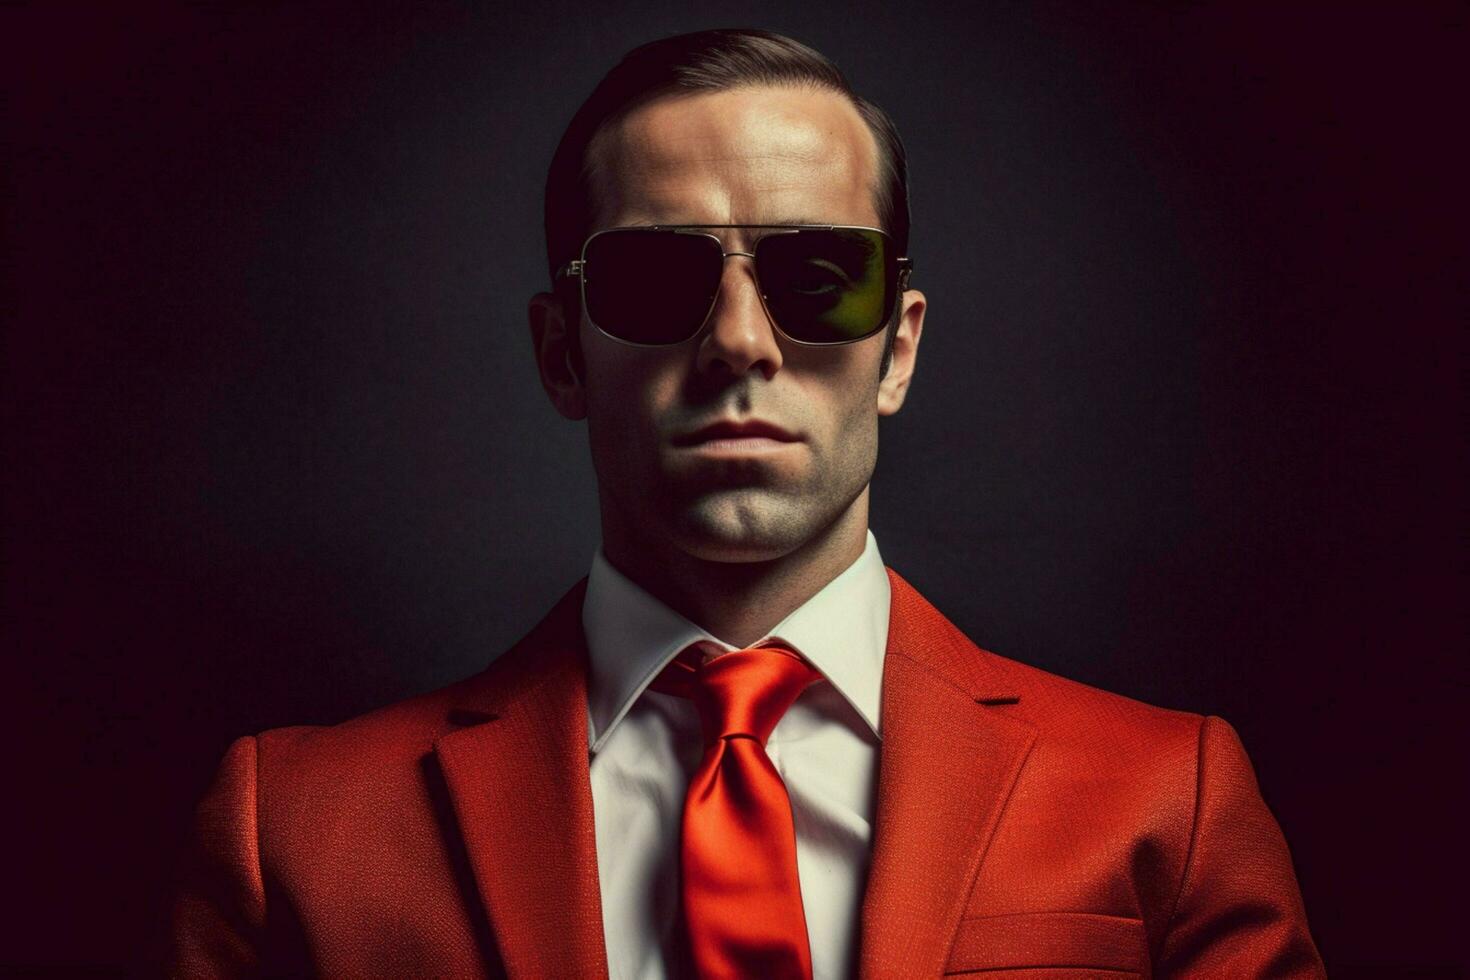 a man wearing sunglasses and a red tie with the w photo